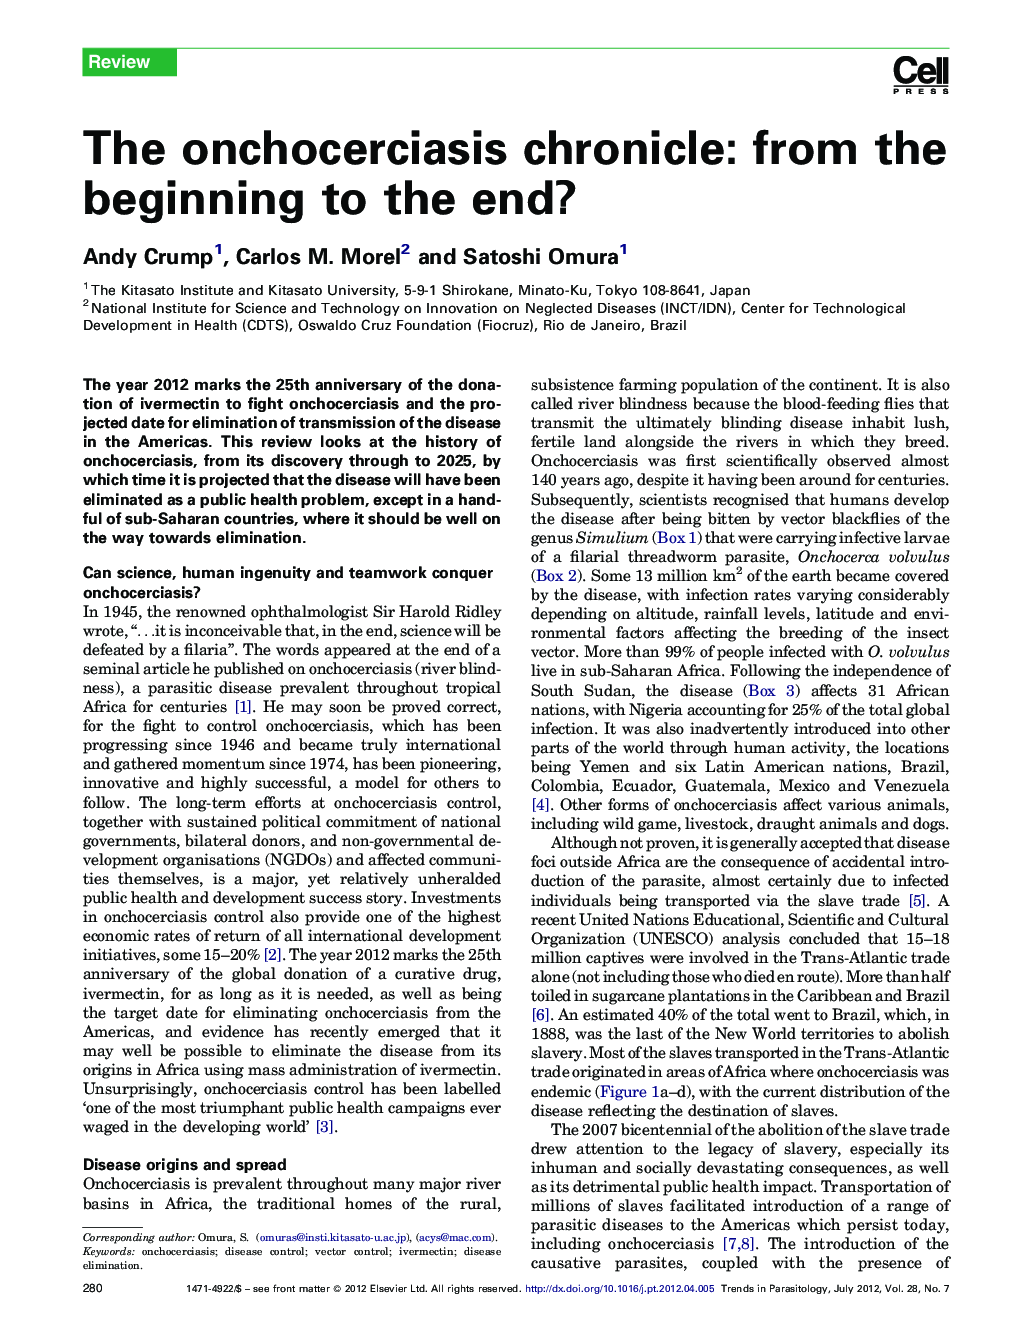 The onchocerciasis chronicle: from the beginning to the end?